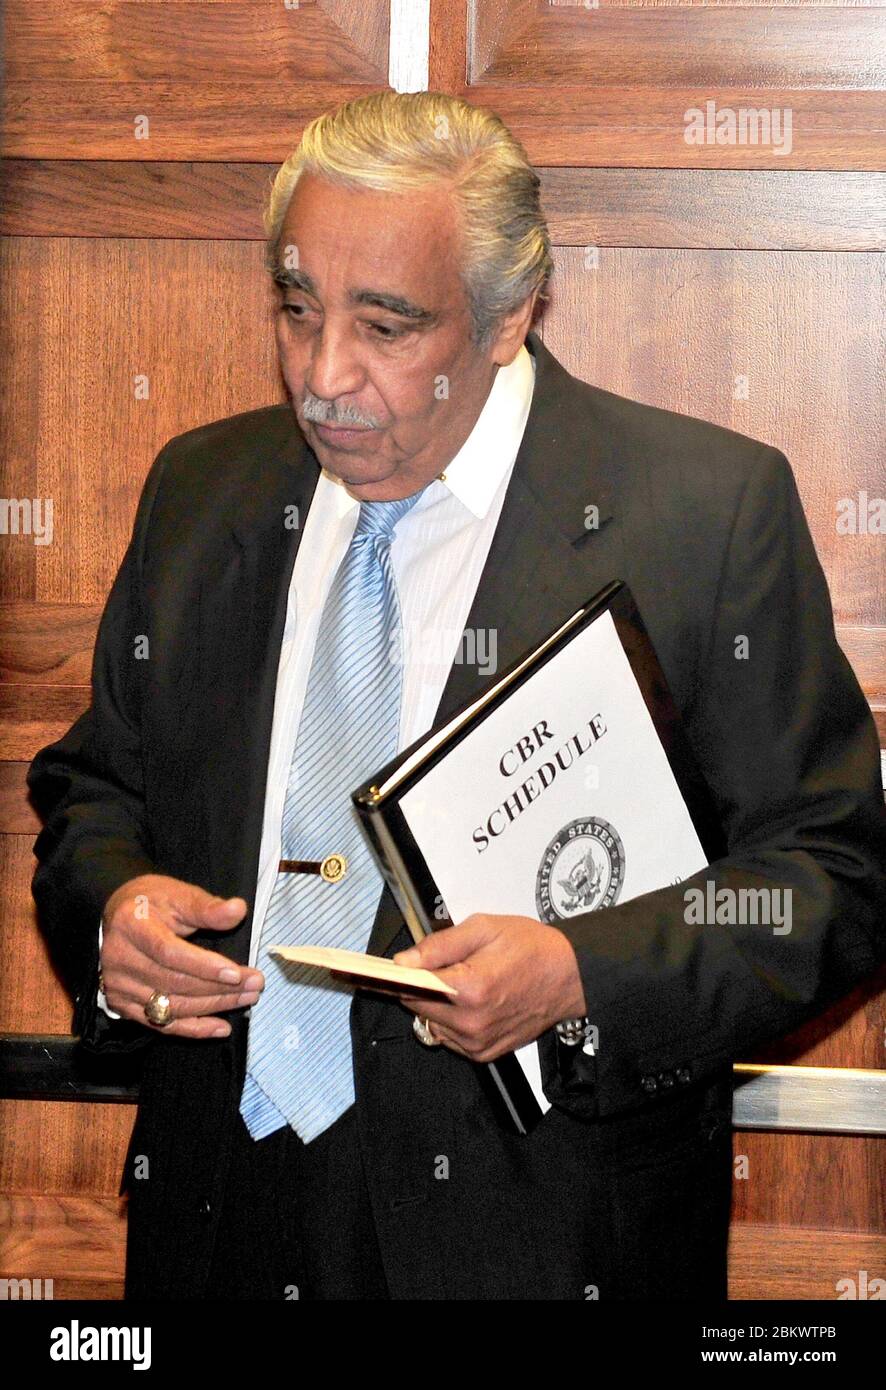 United States Representative Charlie Rangel (Democrat of New York) in an elevator near at his Capitol Hill office on Wednesday, December 1, 2010.Credit: Ron Sachs / CNP  (RESTRICTION: NO New York or New Jersey Newspapers or newspapers within a 75 mile radius of New York City) / MediaPunch Stock Photo